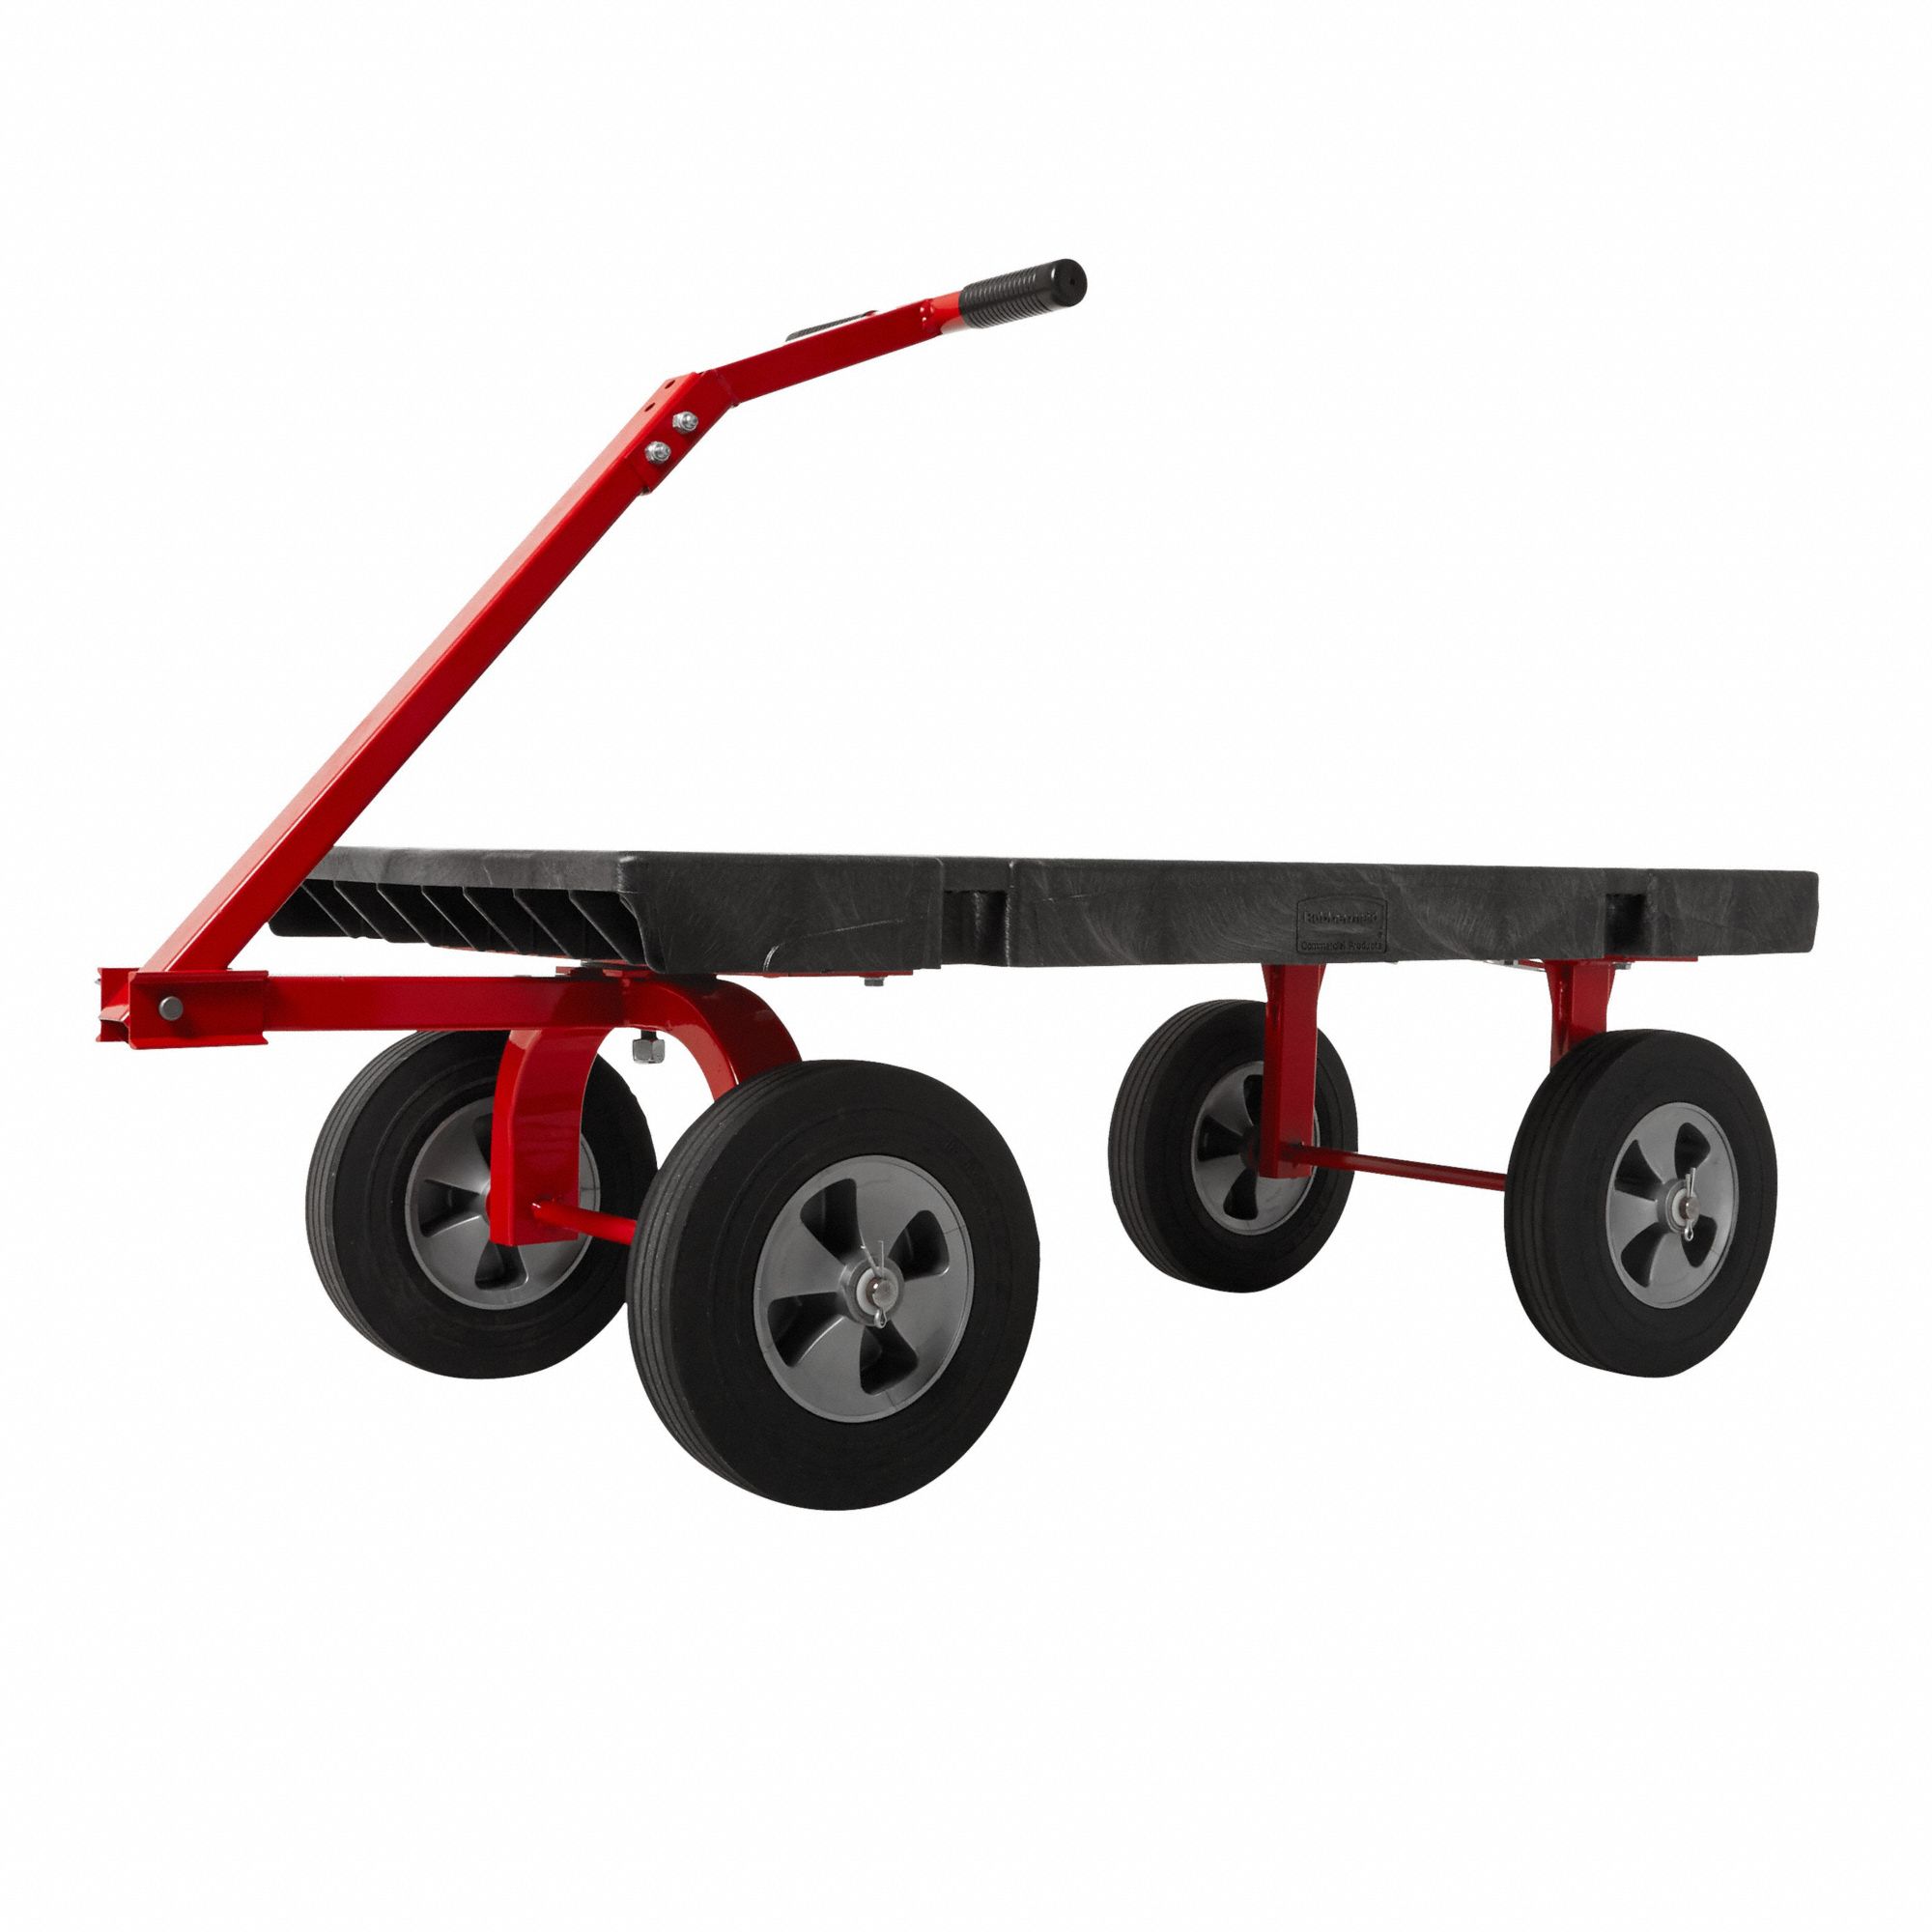 RUBBERMAID COMMERCIAL PRODUCTS Wagon Truck With 5th Wheel, 2000 lb Load ...